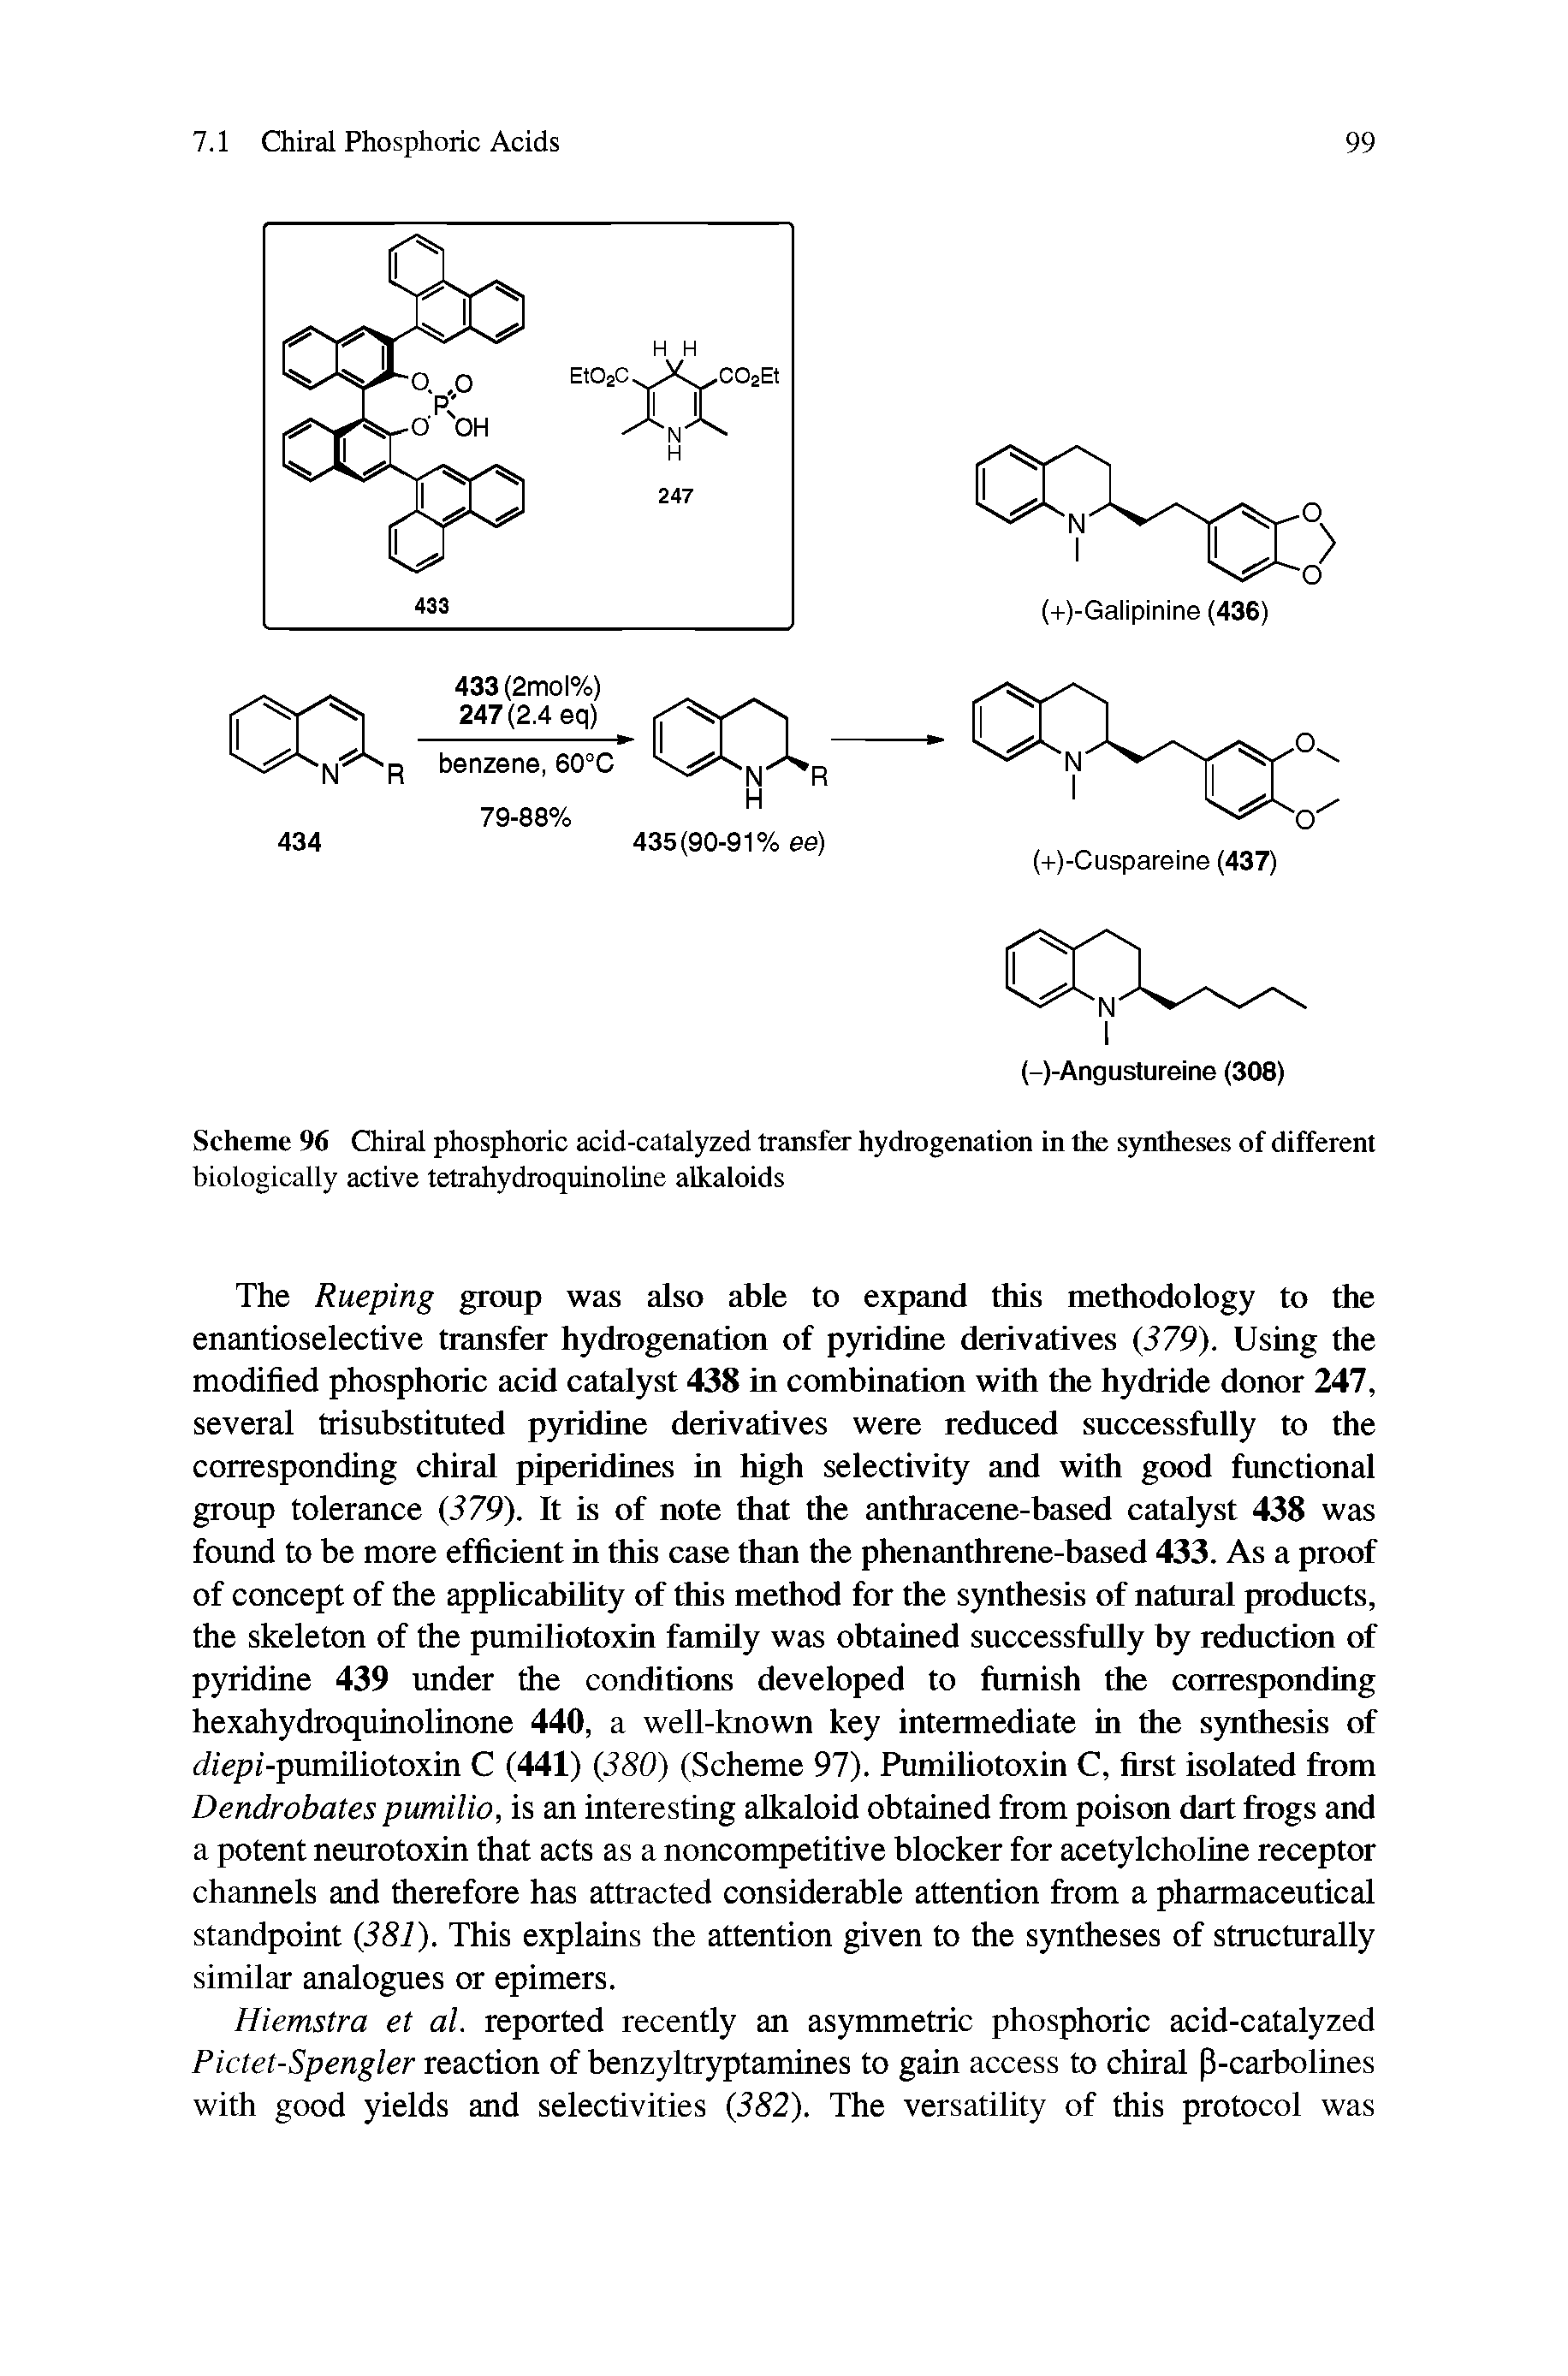 Scheme 96 Chiral phosphoric acid-catalyzed transfer hydrogenation in the syntheses of different biologically active tetrahydroquinoline alkaloids...